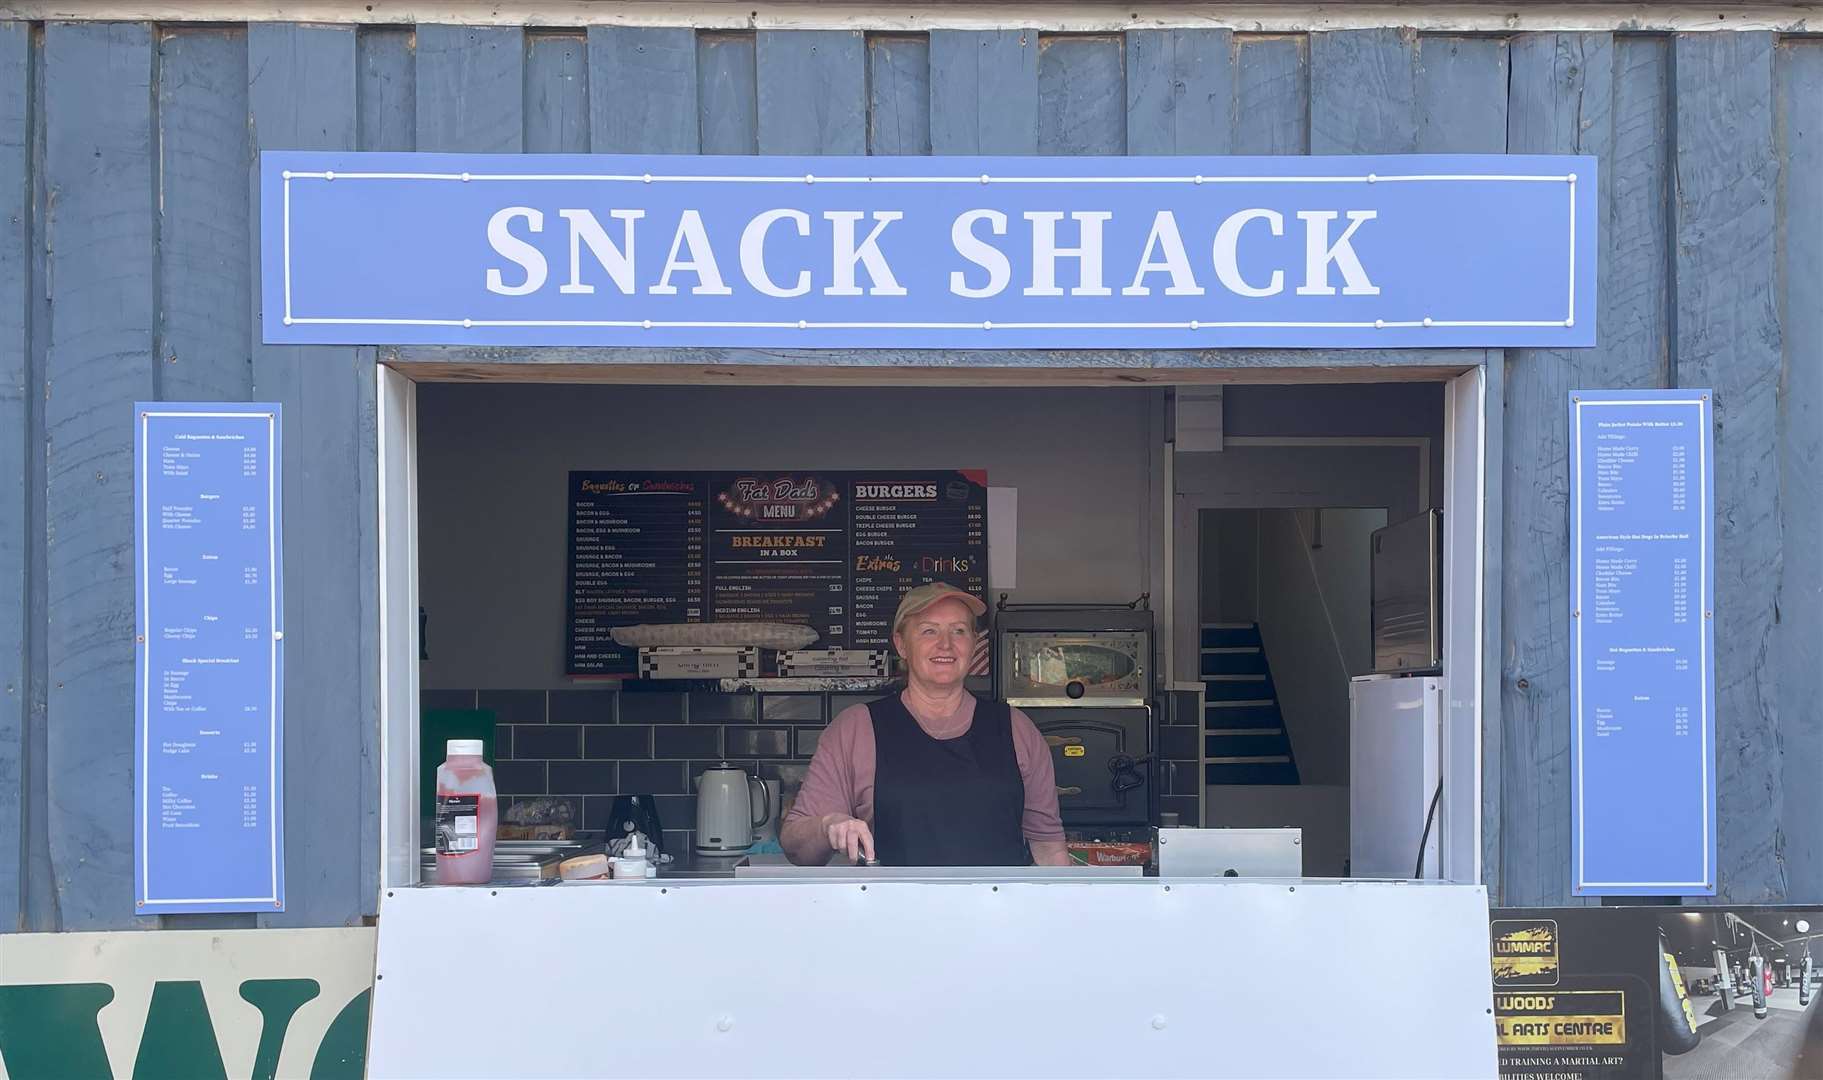 The Snack Shack sells a variety of hot and cold food right onto the high street